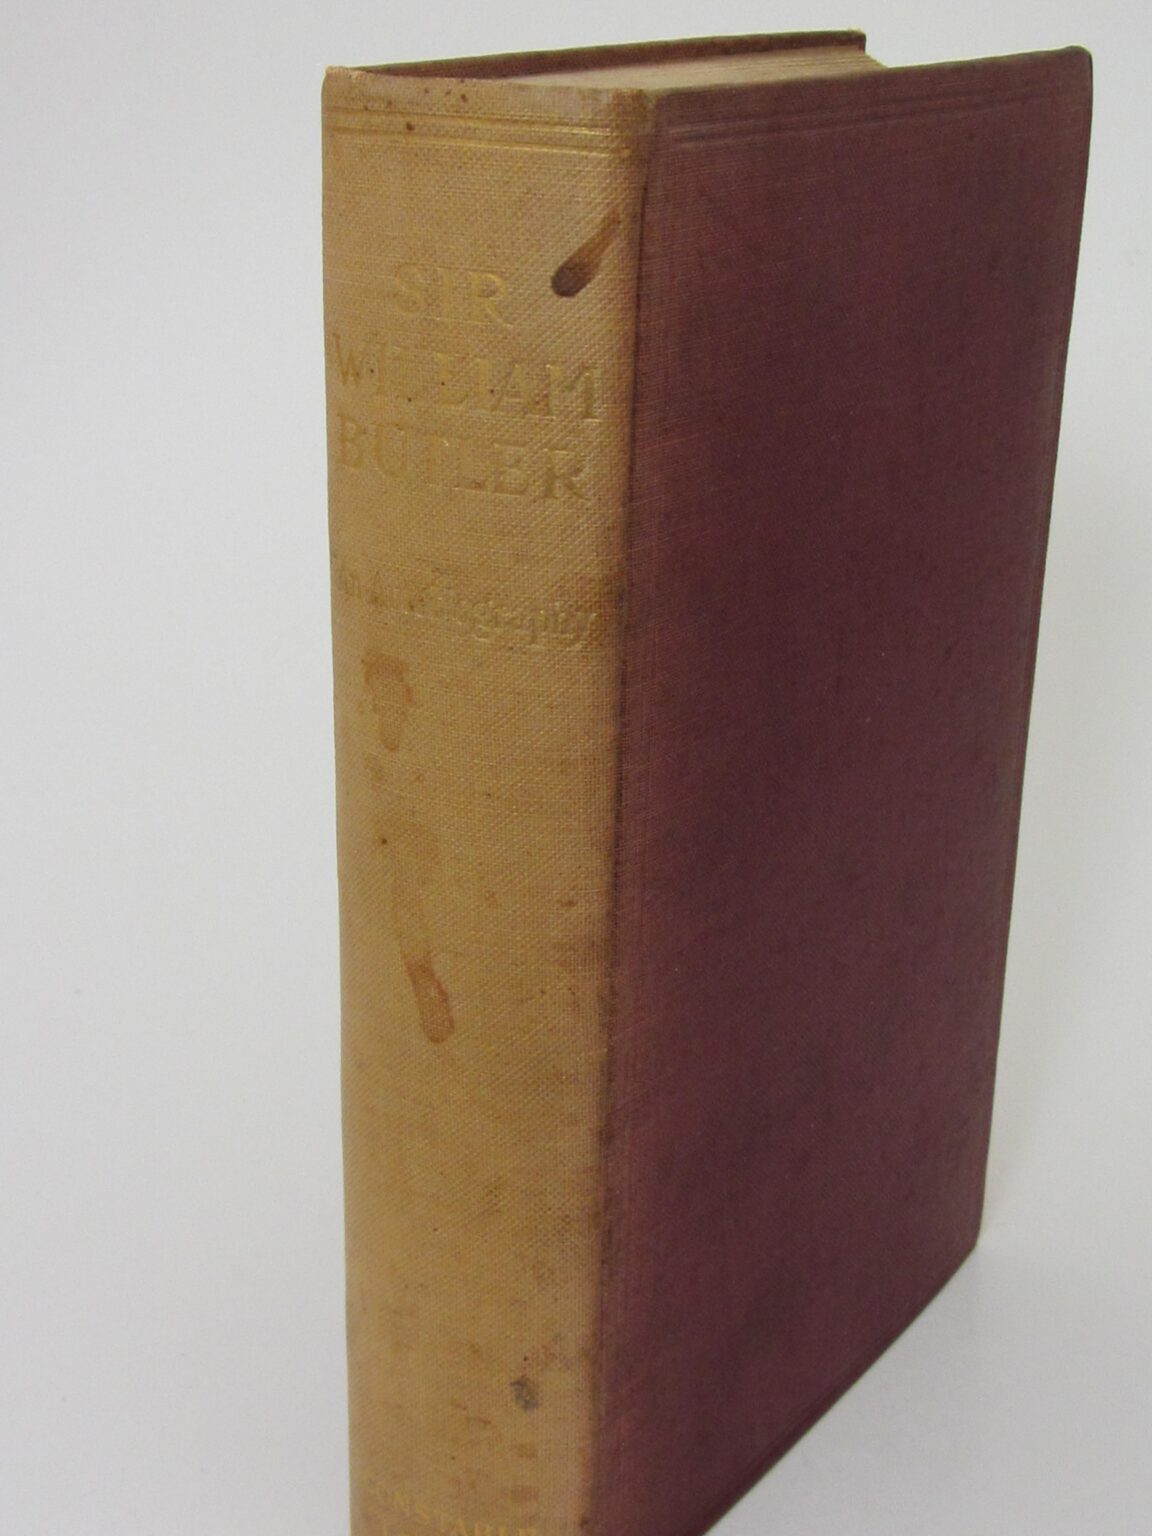 Sir William Butler. An Autobiography (1913) - Ulysses Rare Books